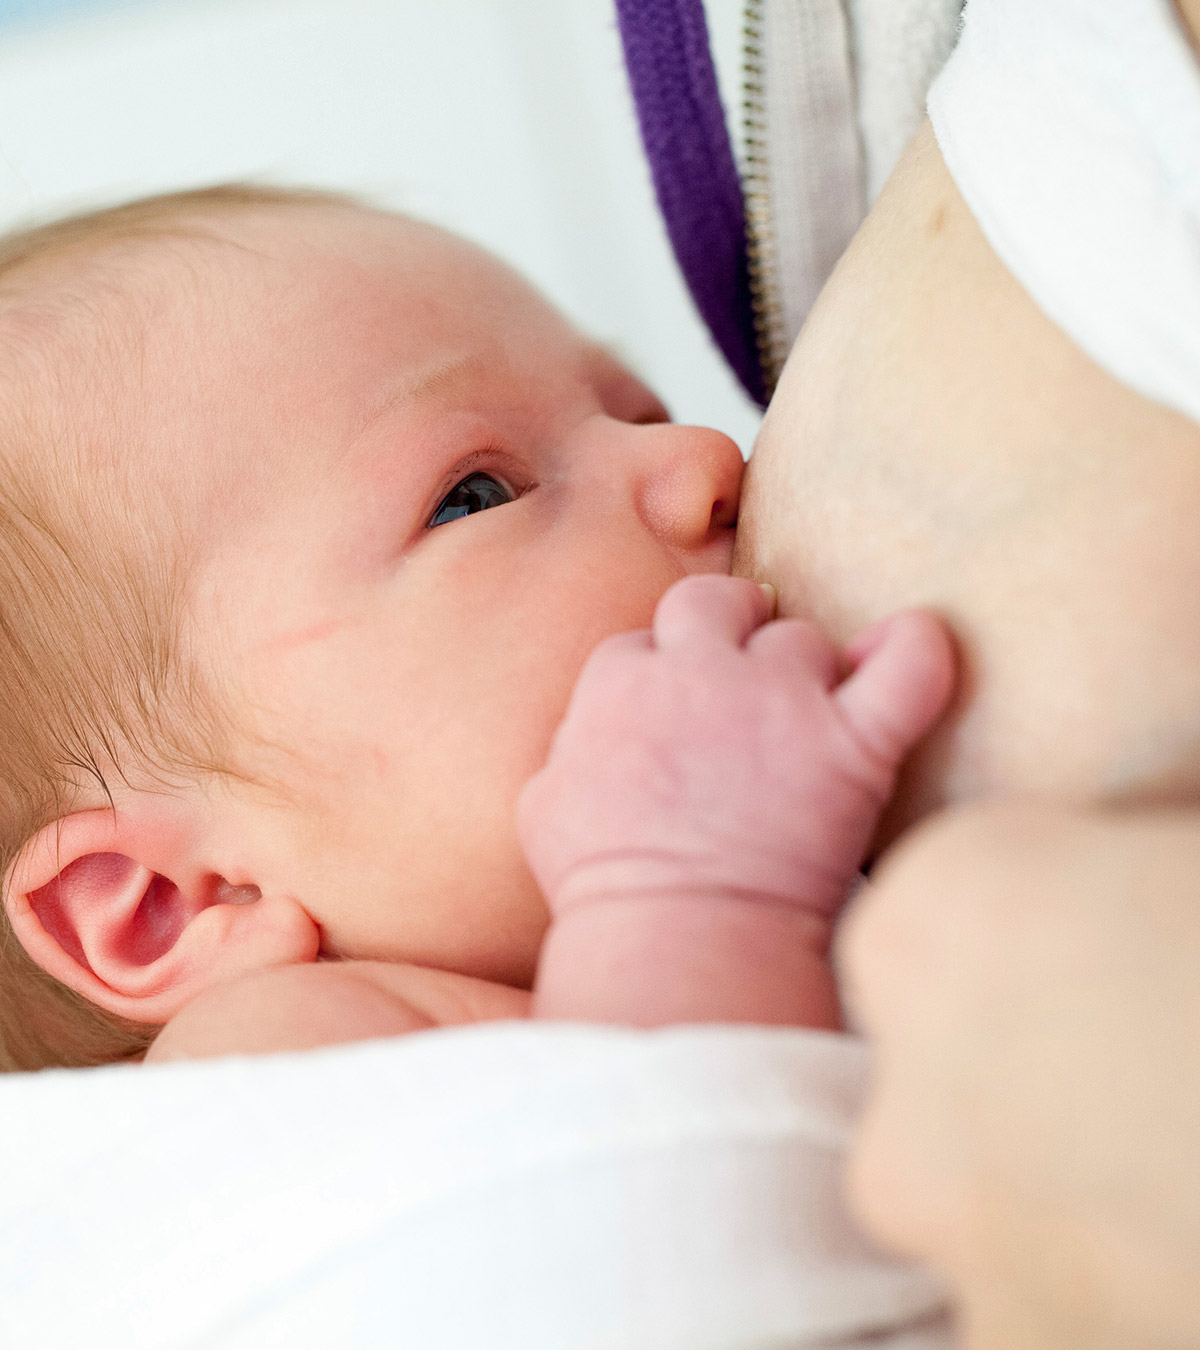 5-Useful-Tips-To-Take-Care-Of-Your-One-Month-Old-Baby1